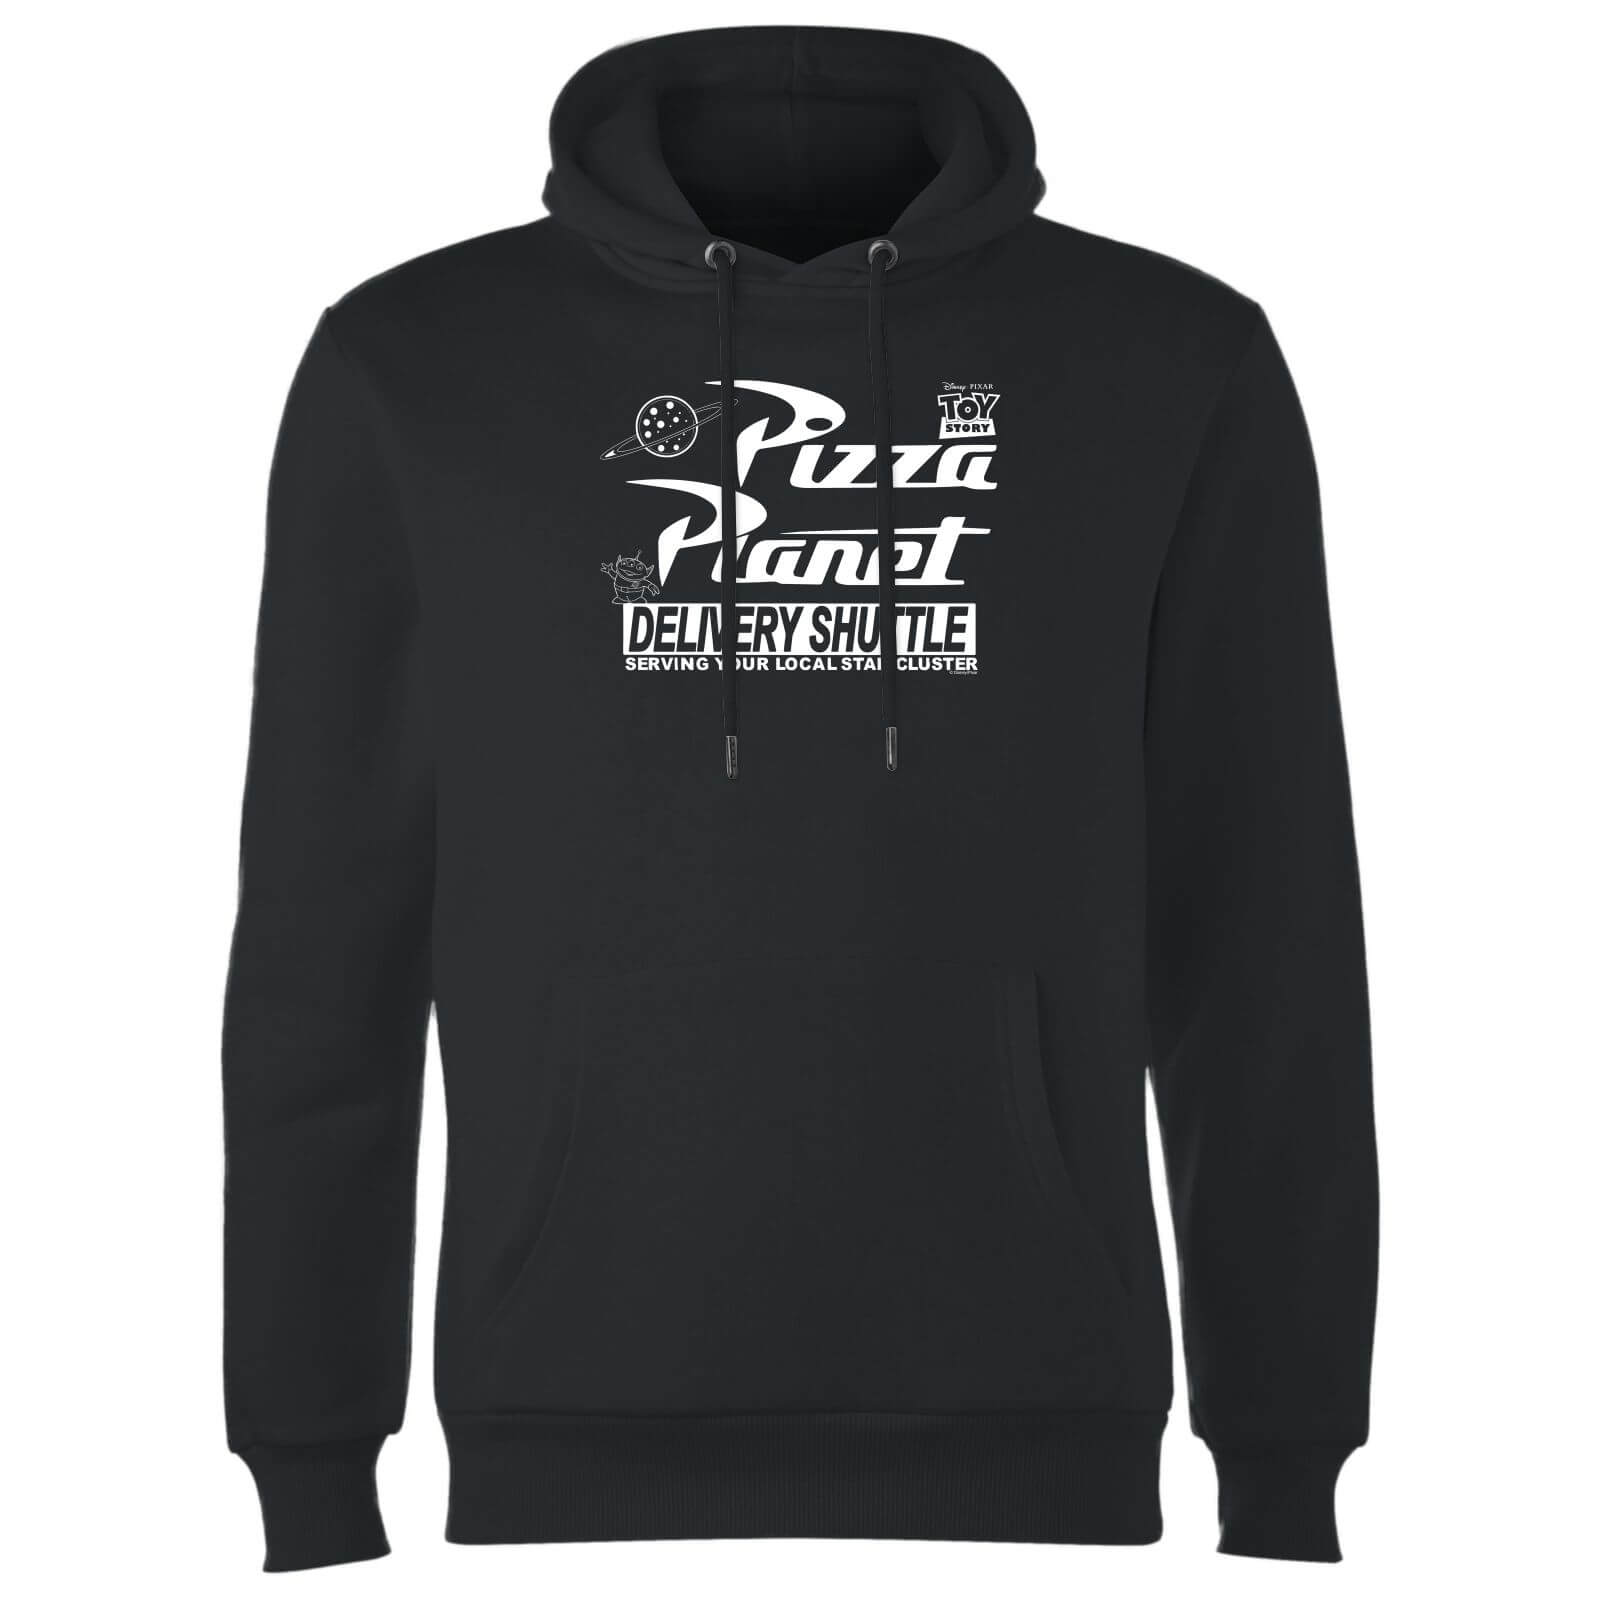 Toy Story Pizza Planet Logo Hoodie - Black - S